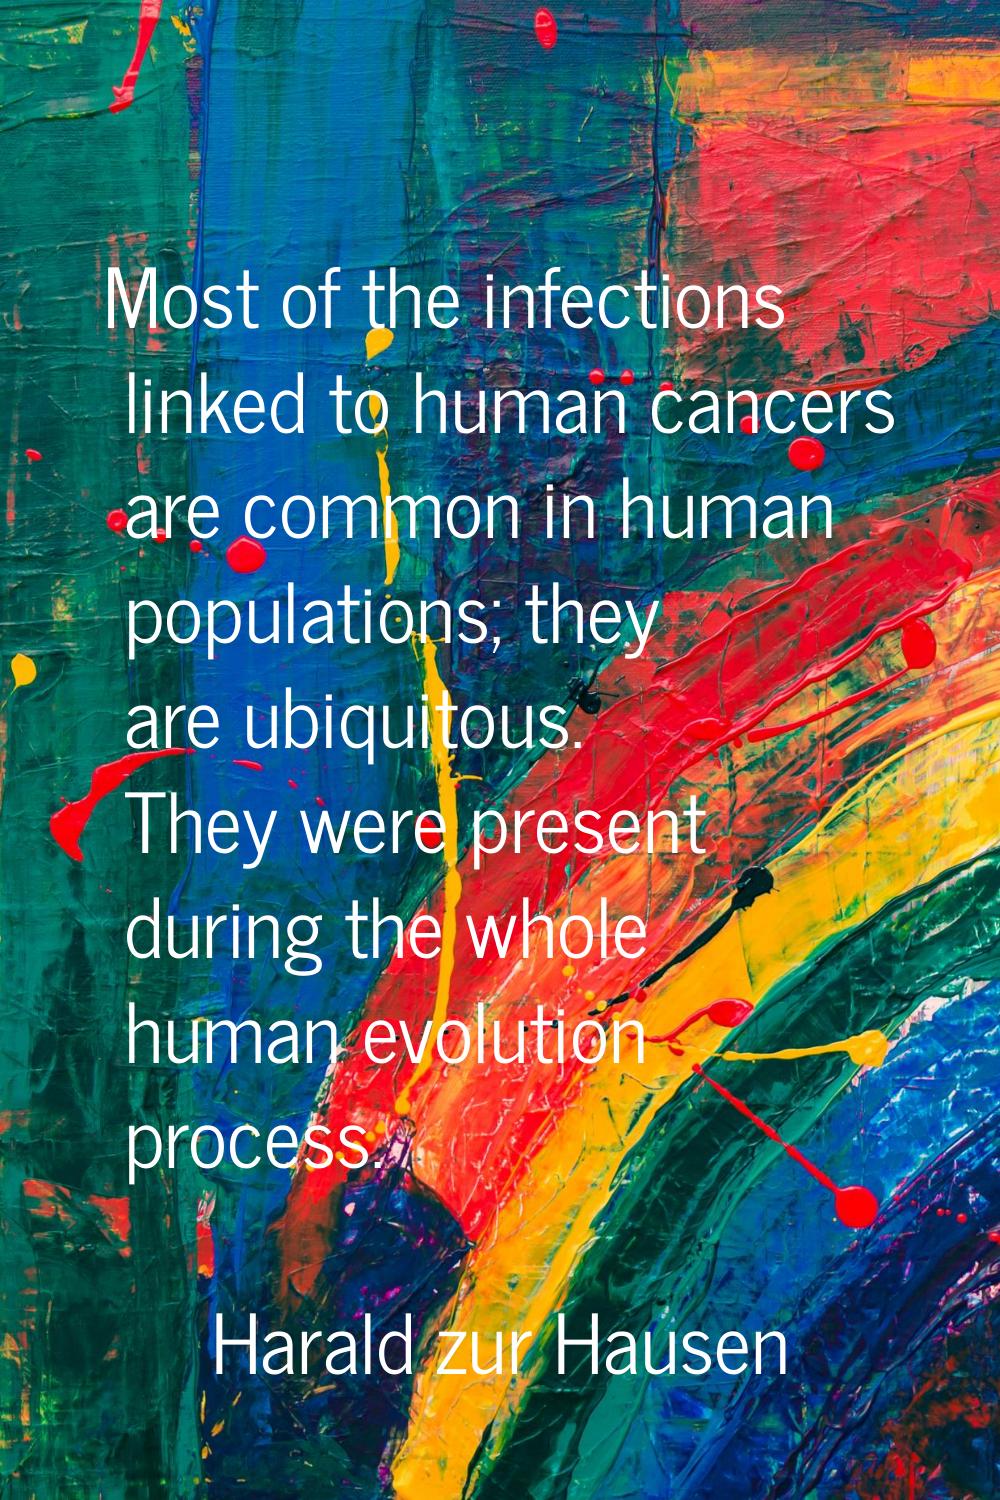 Most of the infections linked to human cancers are common in human populations; they are ubiquitous